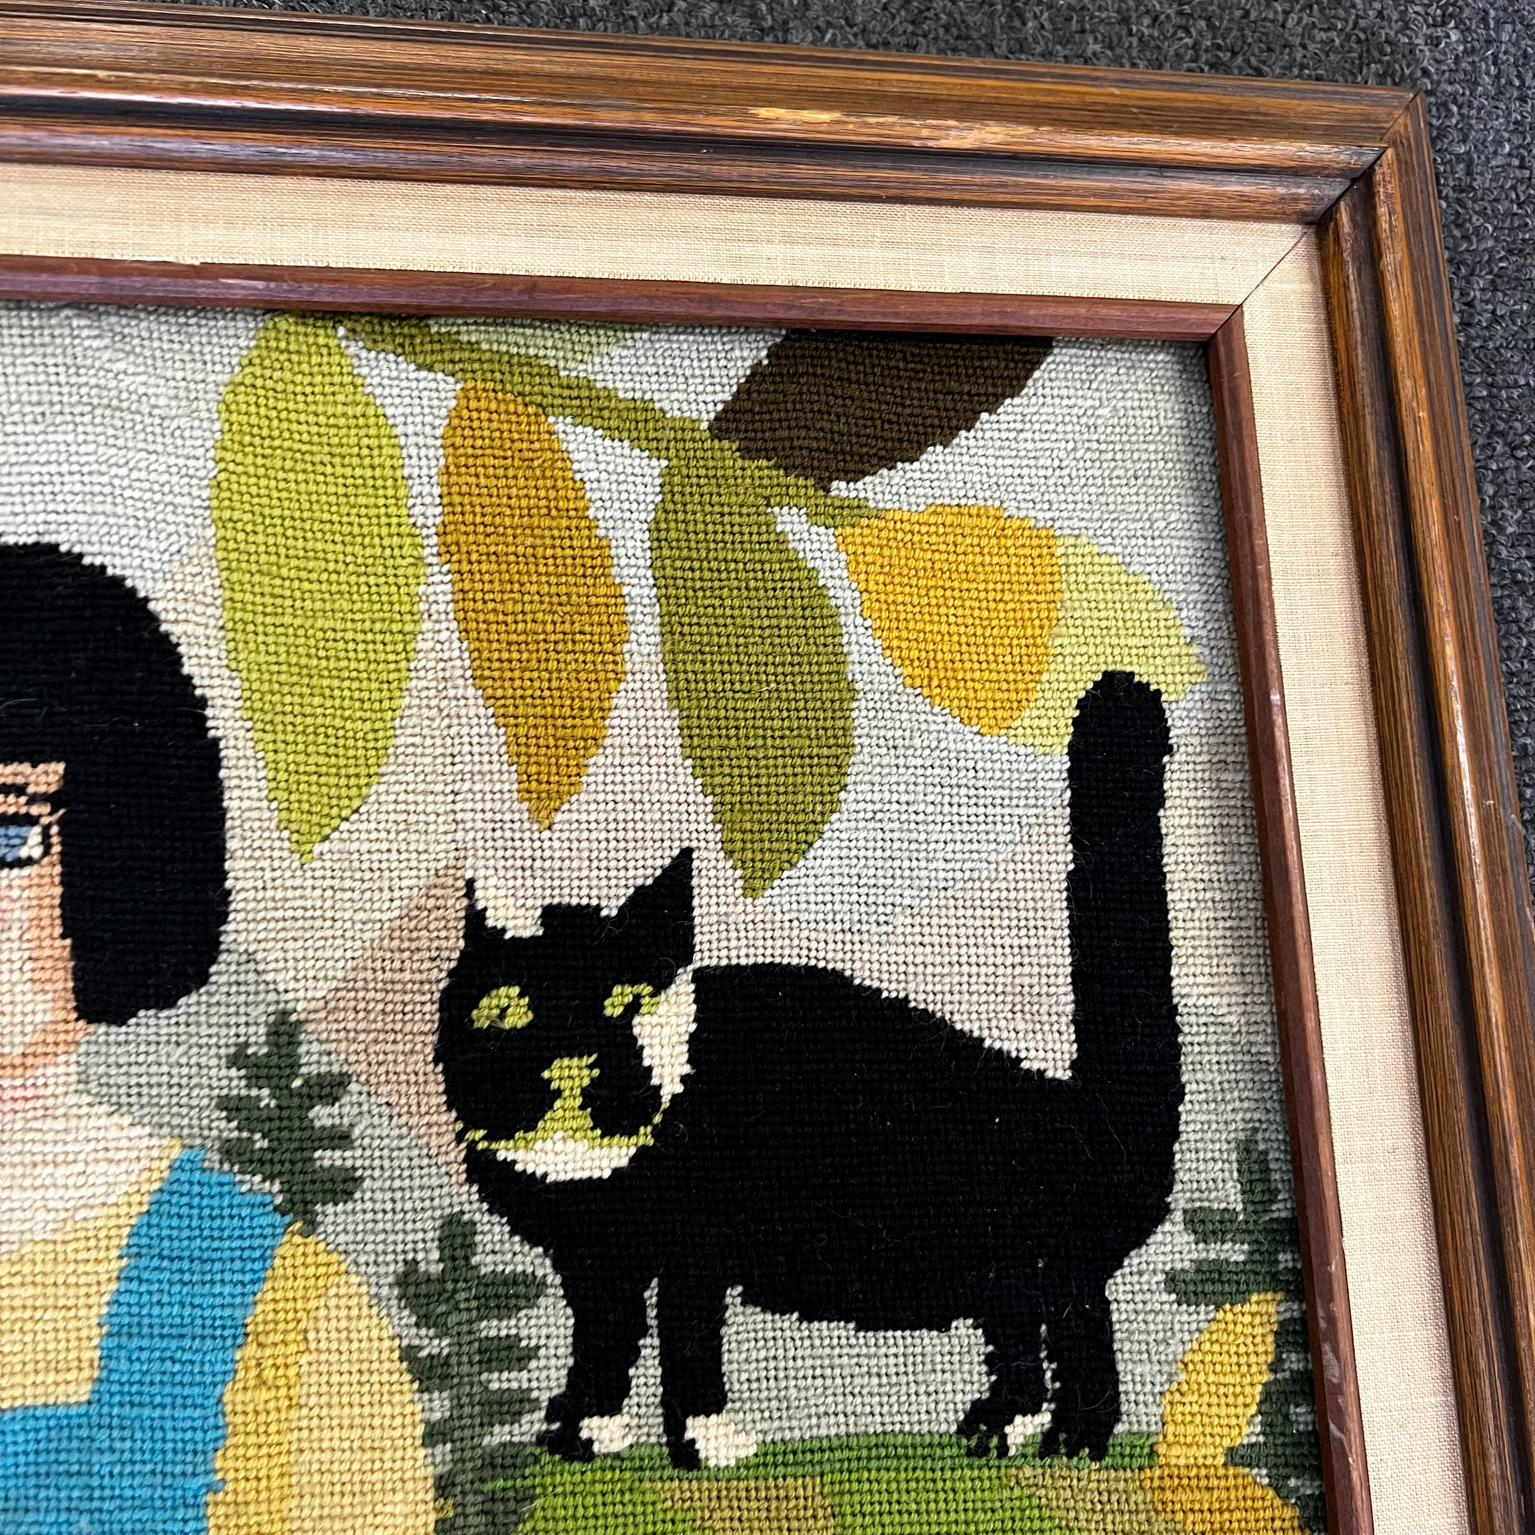 Mid-Century Modern 1970s Vibrant Handmade Needlepoint Embroidery Wall Artwork Girl Doll and Cat